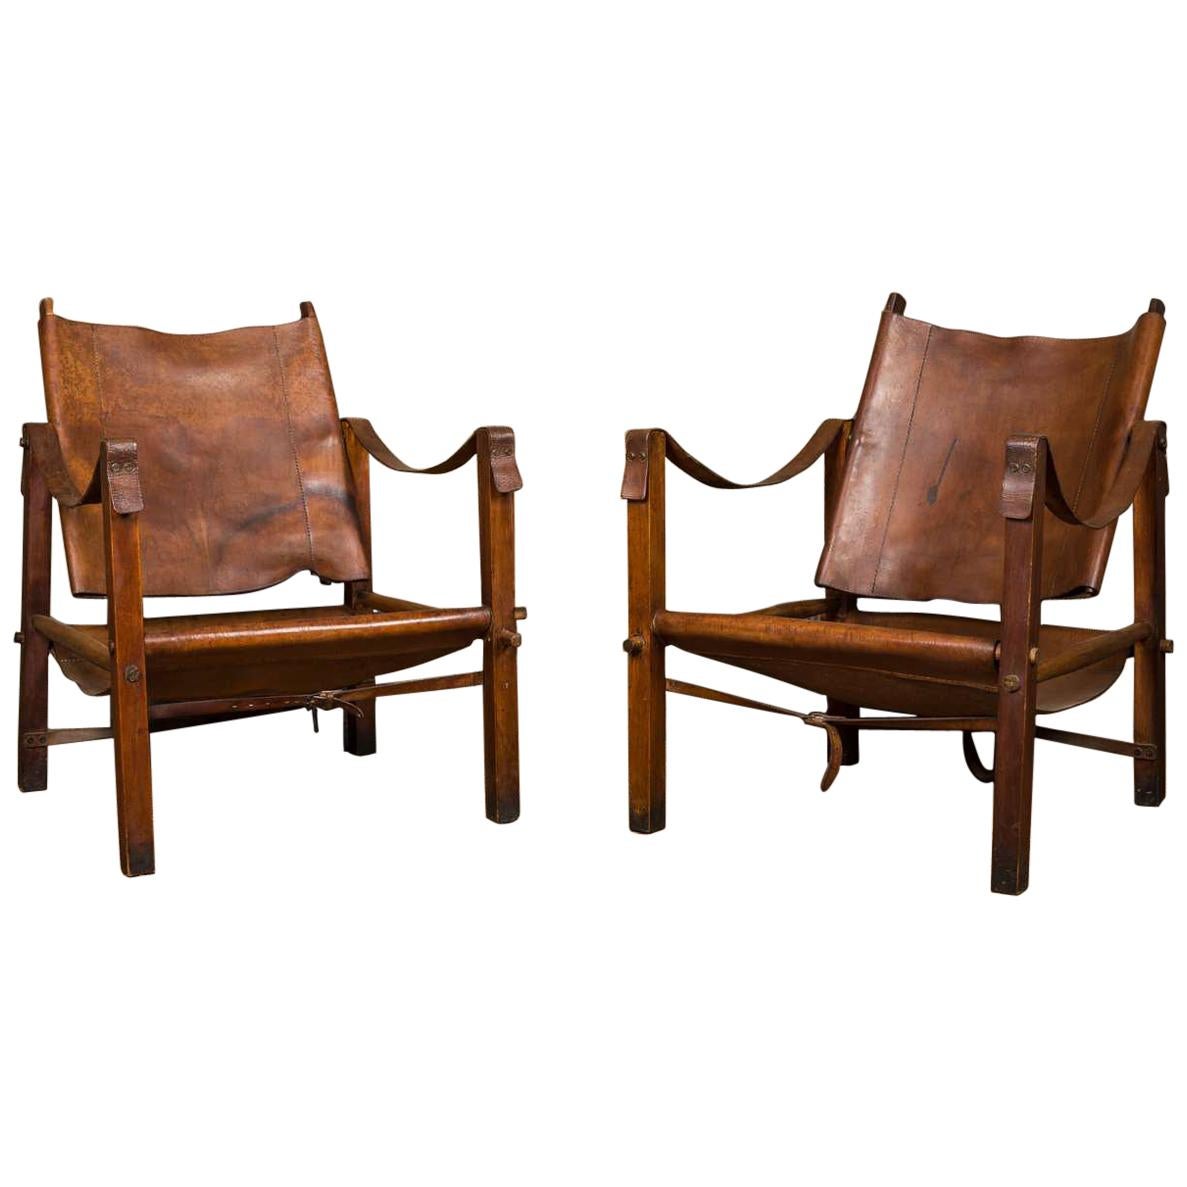 Pair of Vintage Brown Leather Safari Chairs, 1960s